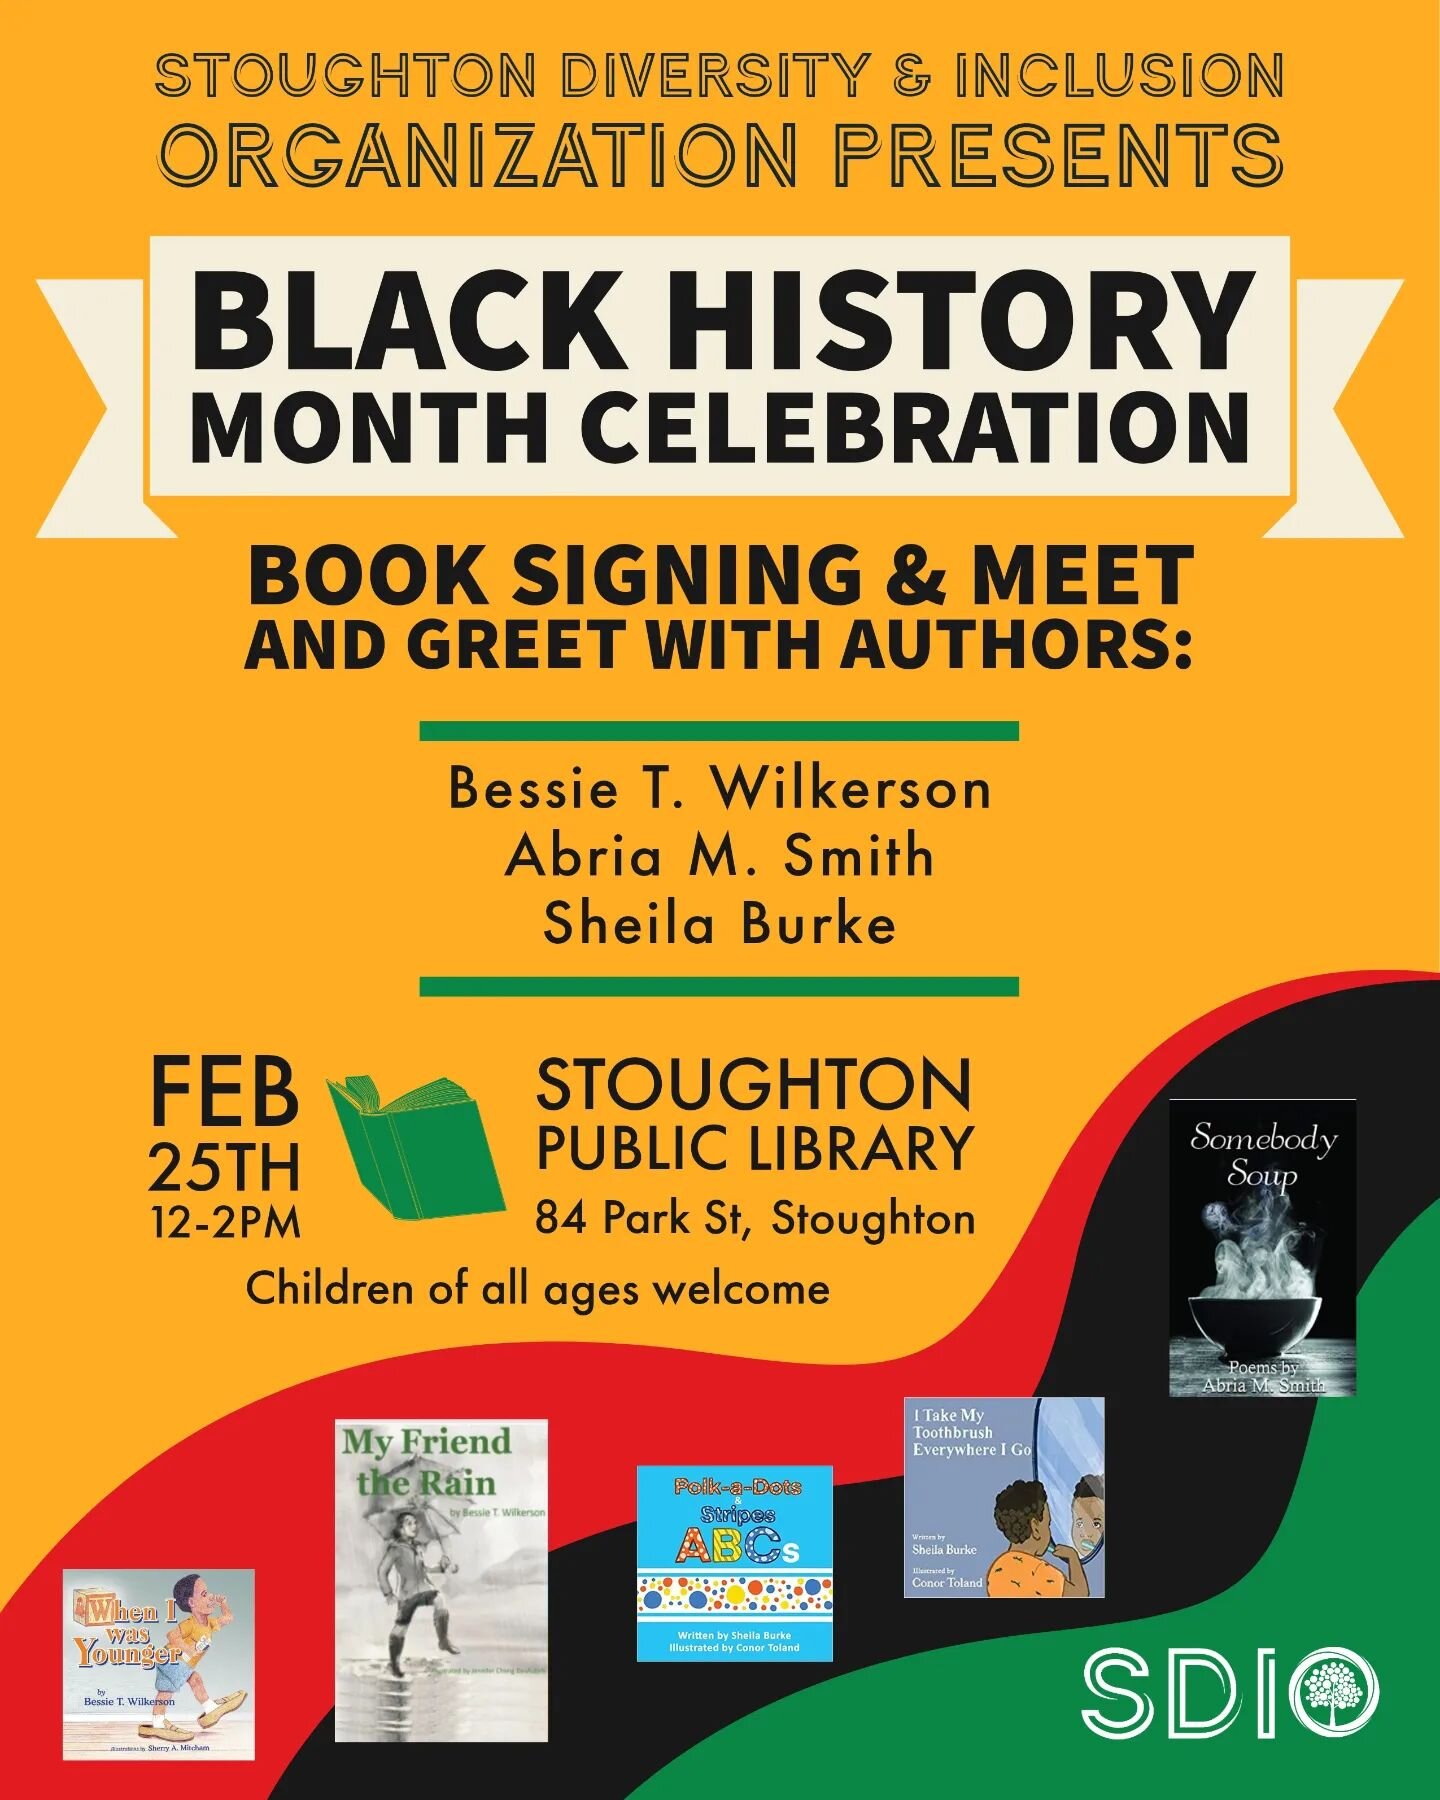 Stoughton Diversity &amp; Inclusion Organization presents Black History Month Celebration Book Signing &amp; Meet and Greet with Authors: Bessie T. Wilkerson, Abria M. Smith, and Sheila Burke.

Join us on Feb 25th from 12-2pm at the @stoughtonpublicl